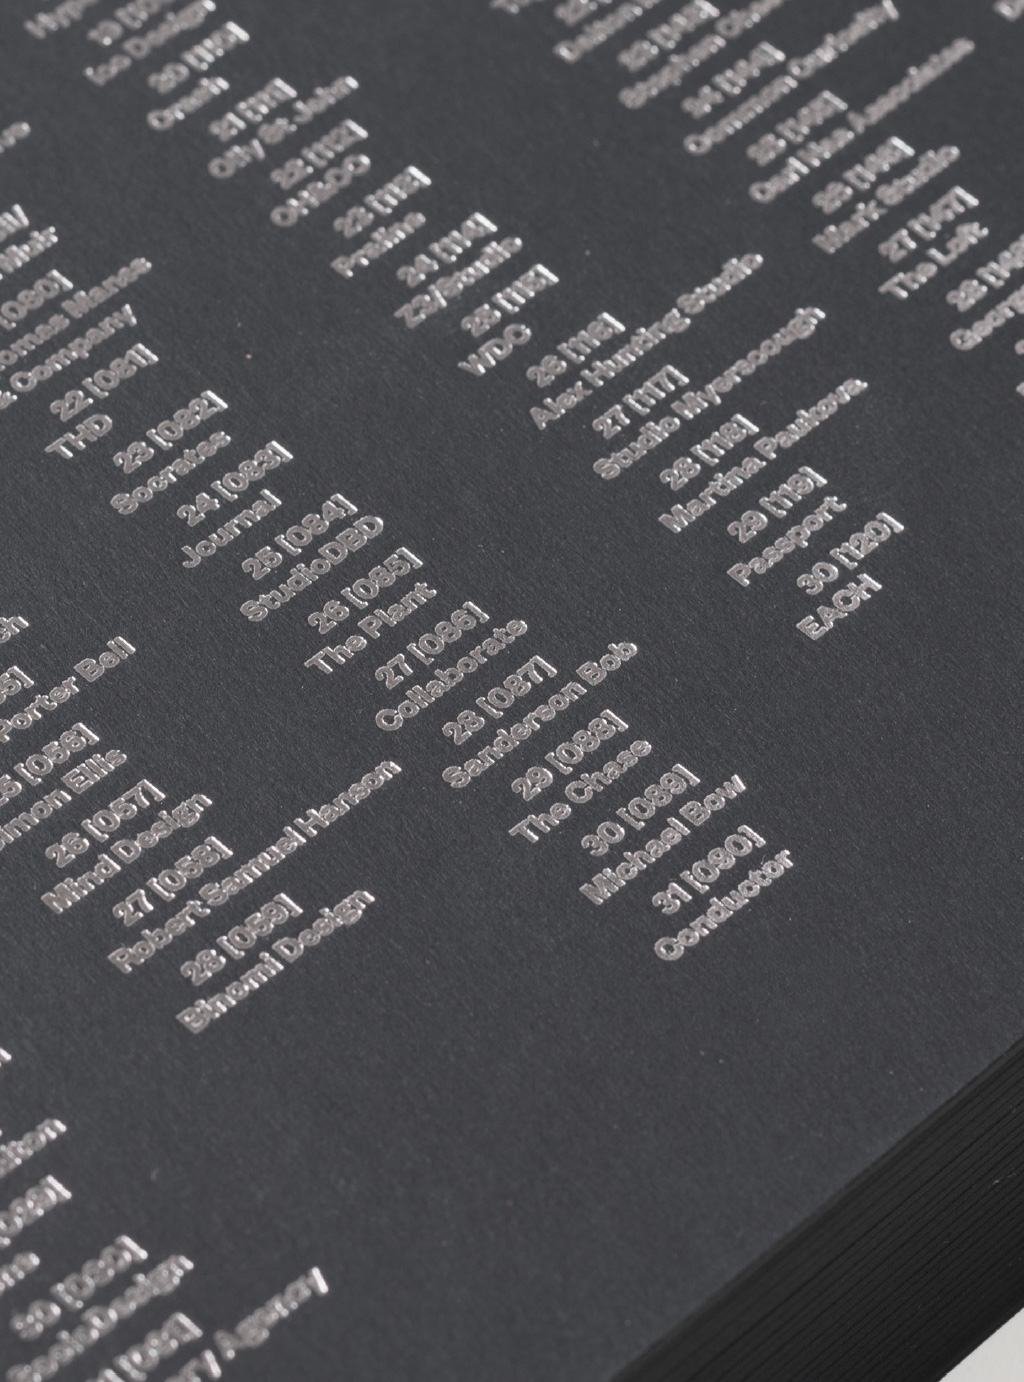 detail of gun metal written names and numbers on the black book